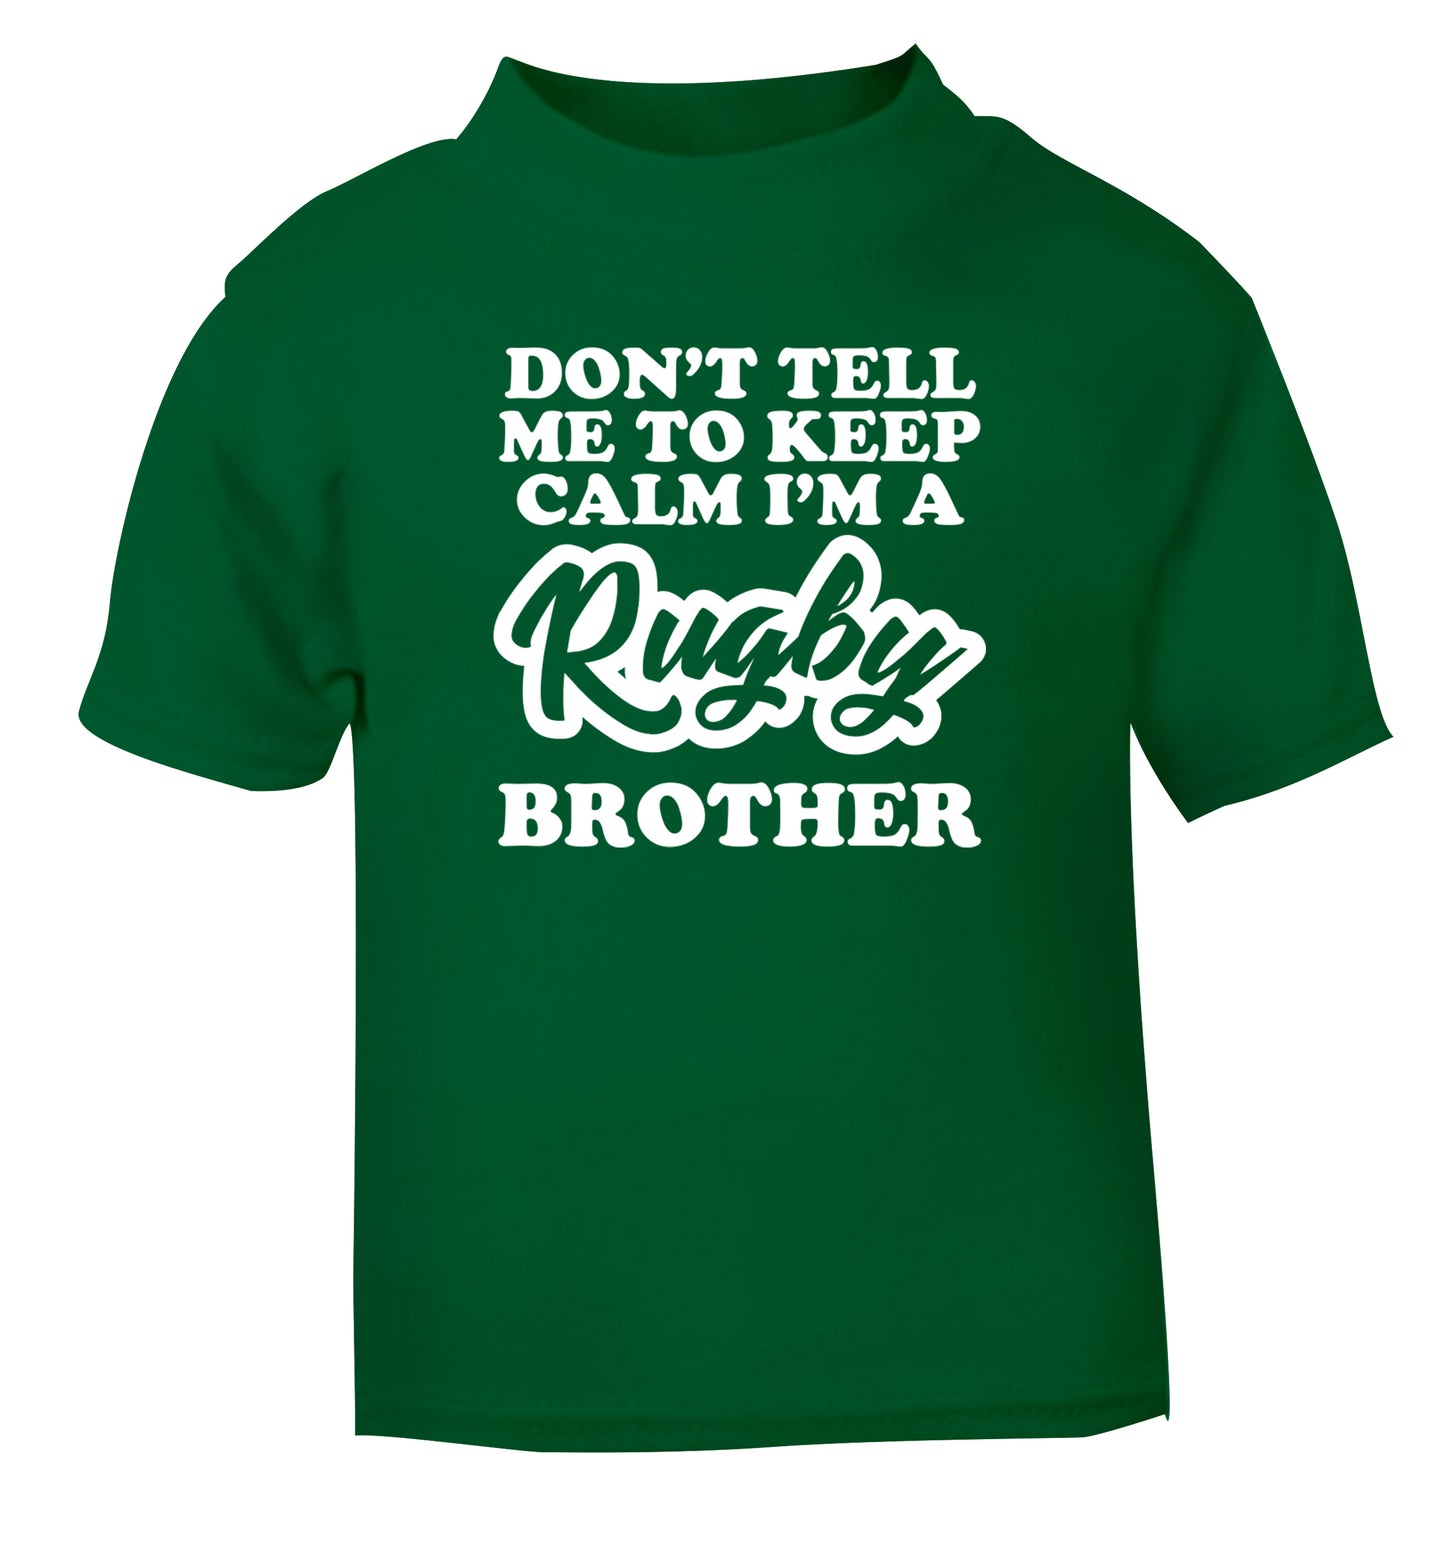 Don't tell me keep calm I'm a rugby brother green Baby Toddler Tshirt 2 Years